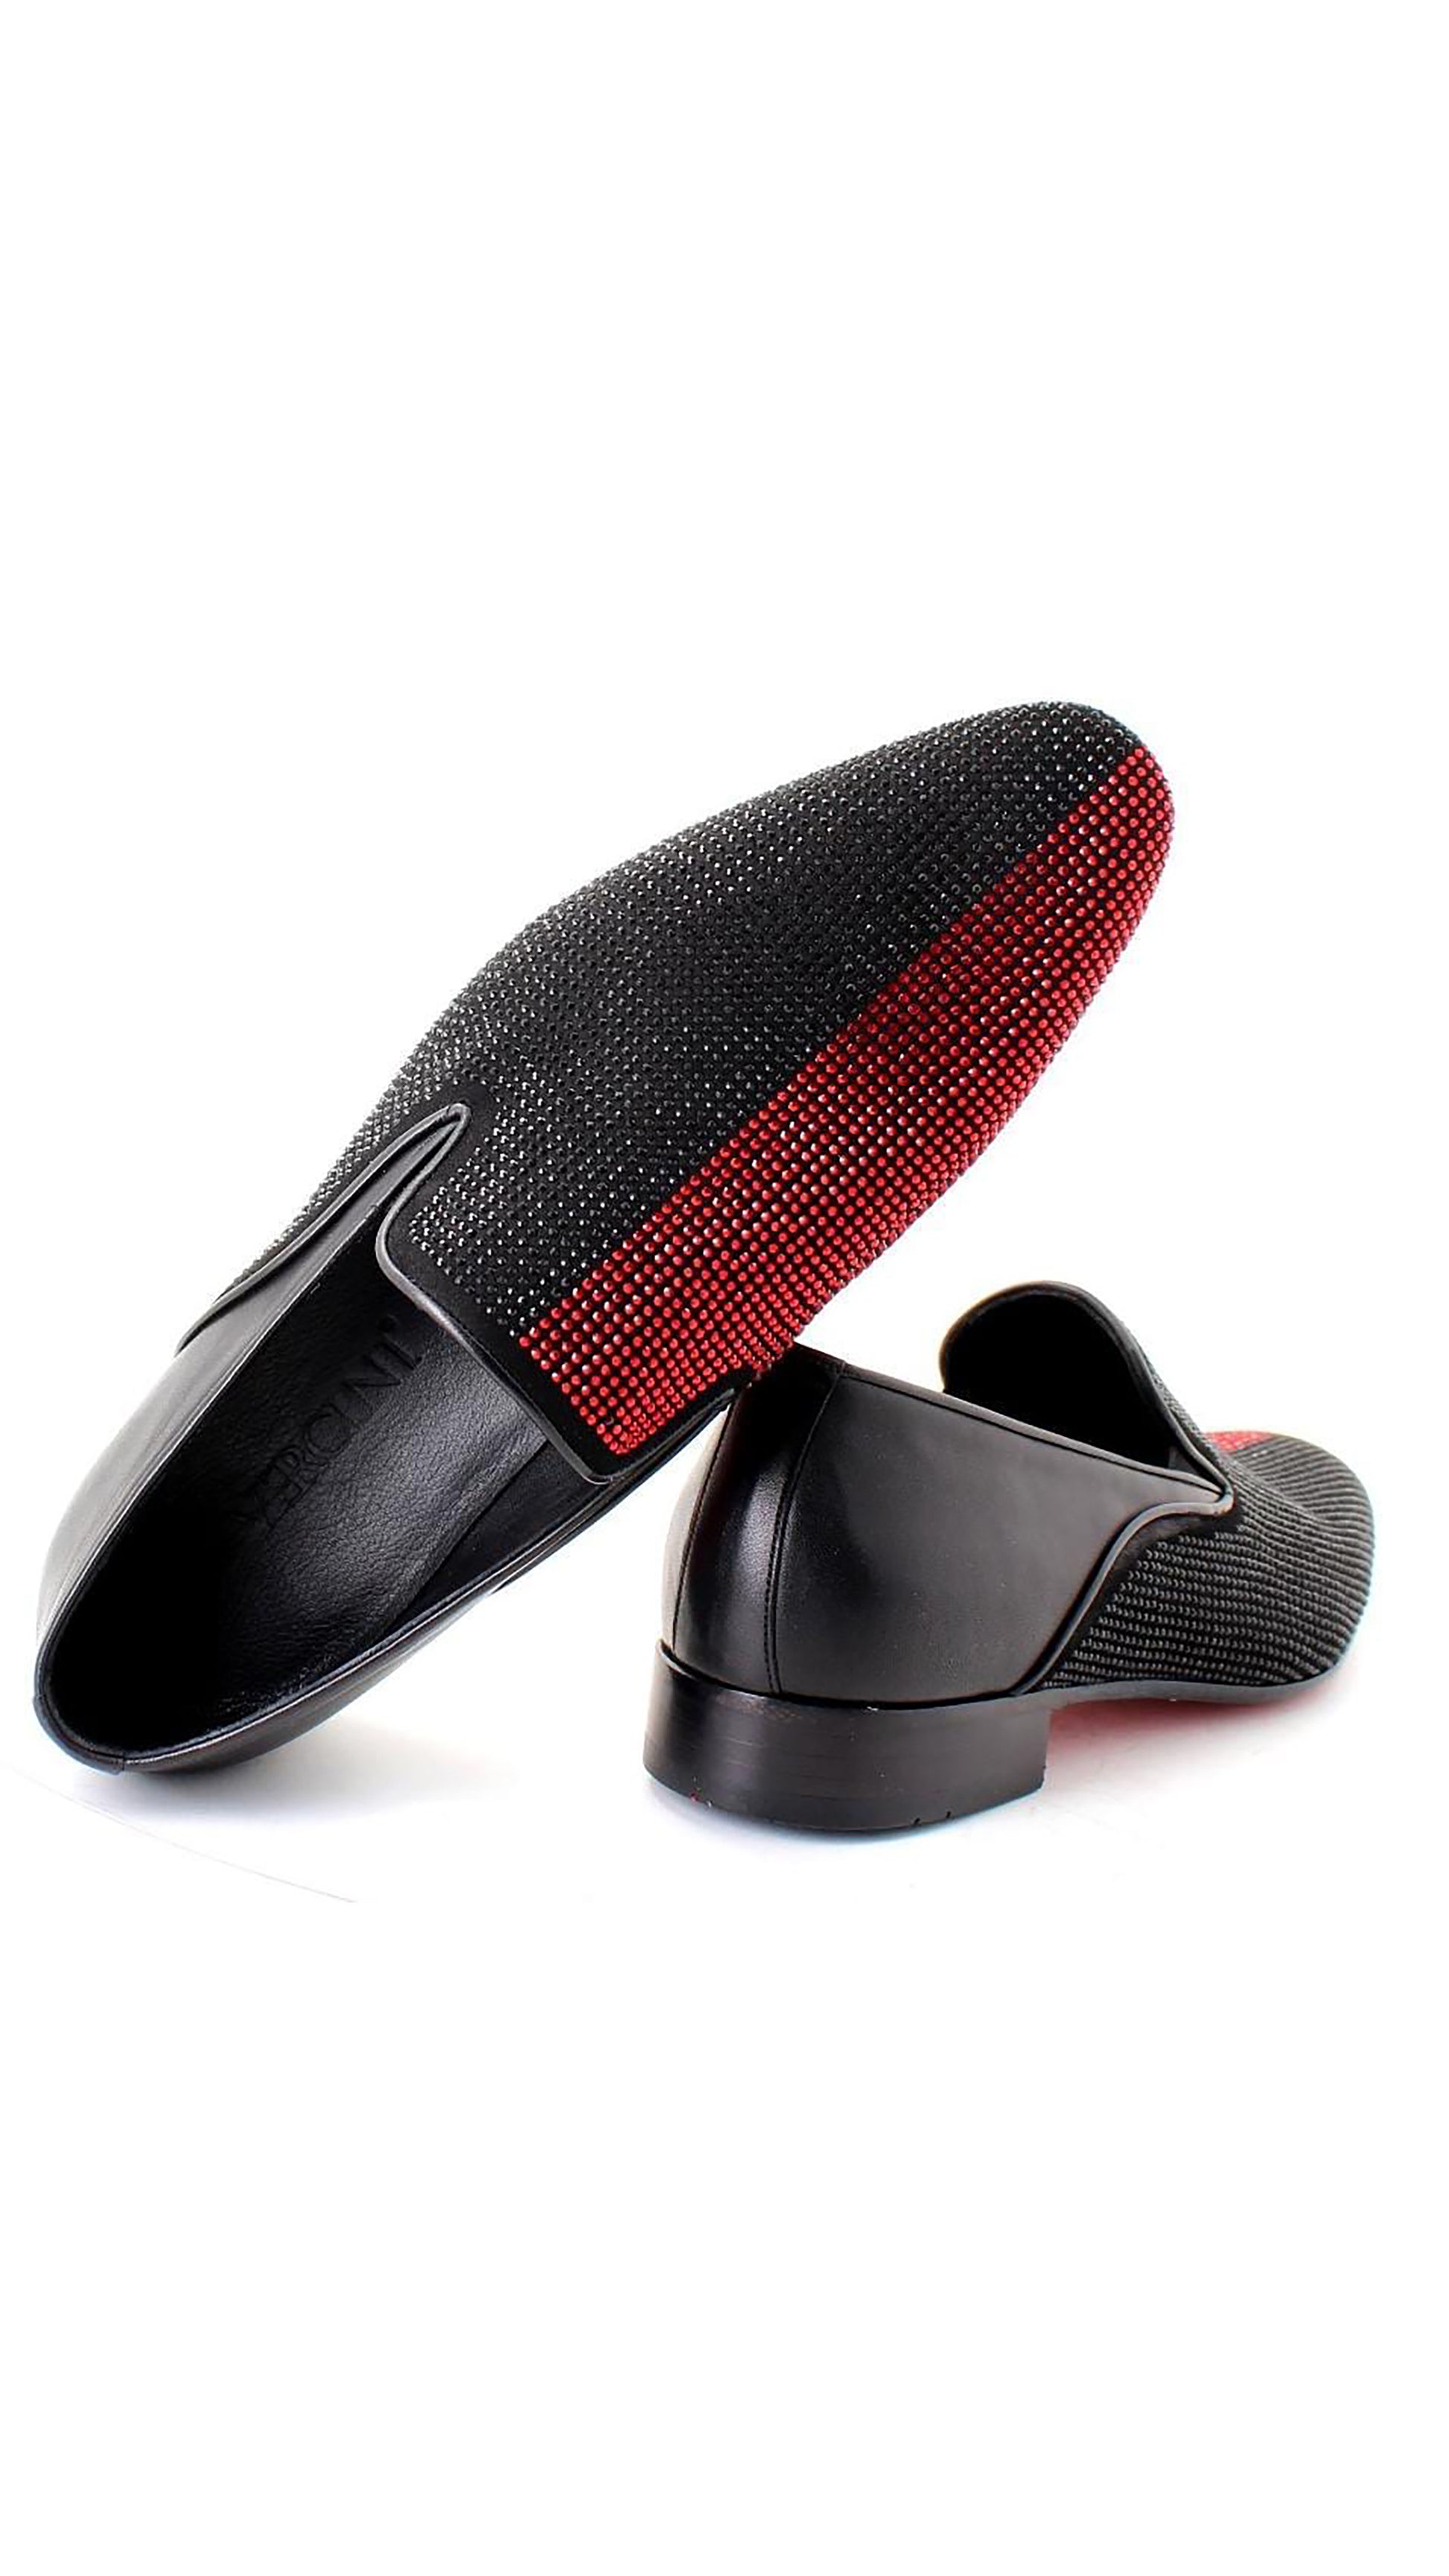 Vercini Radiant Red Accent Loafers SHOES Shoe Collection Vercini